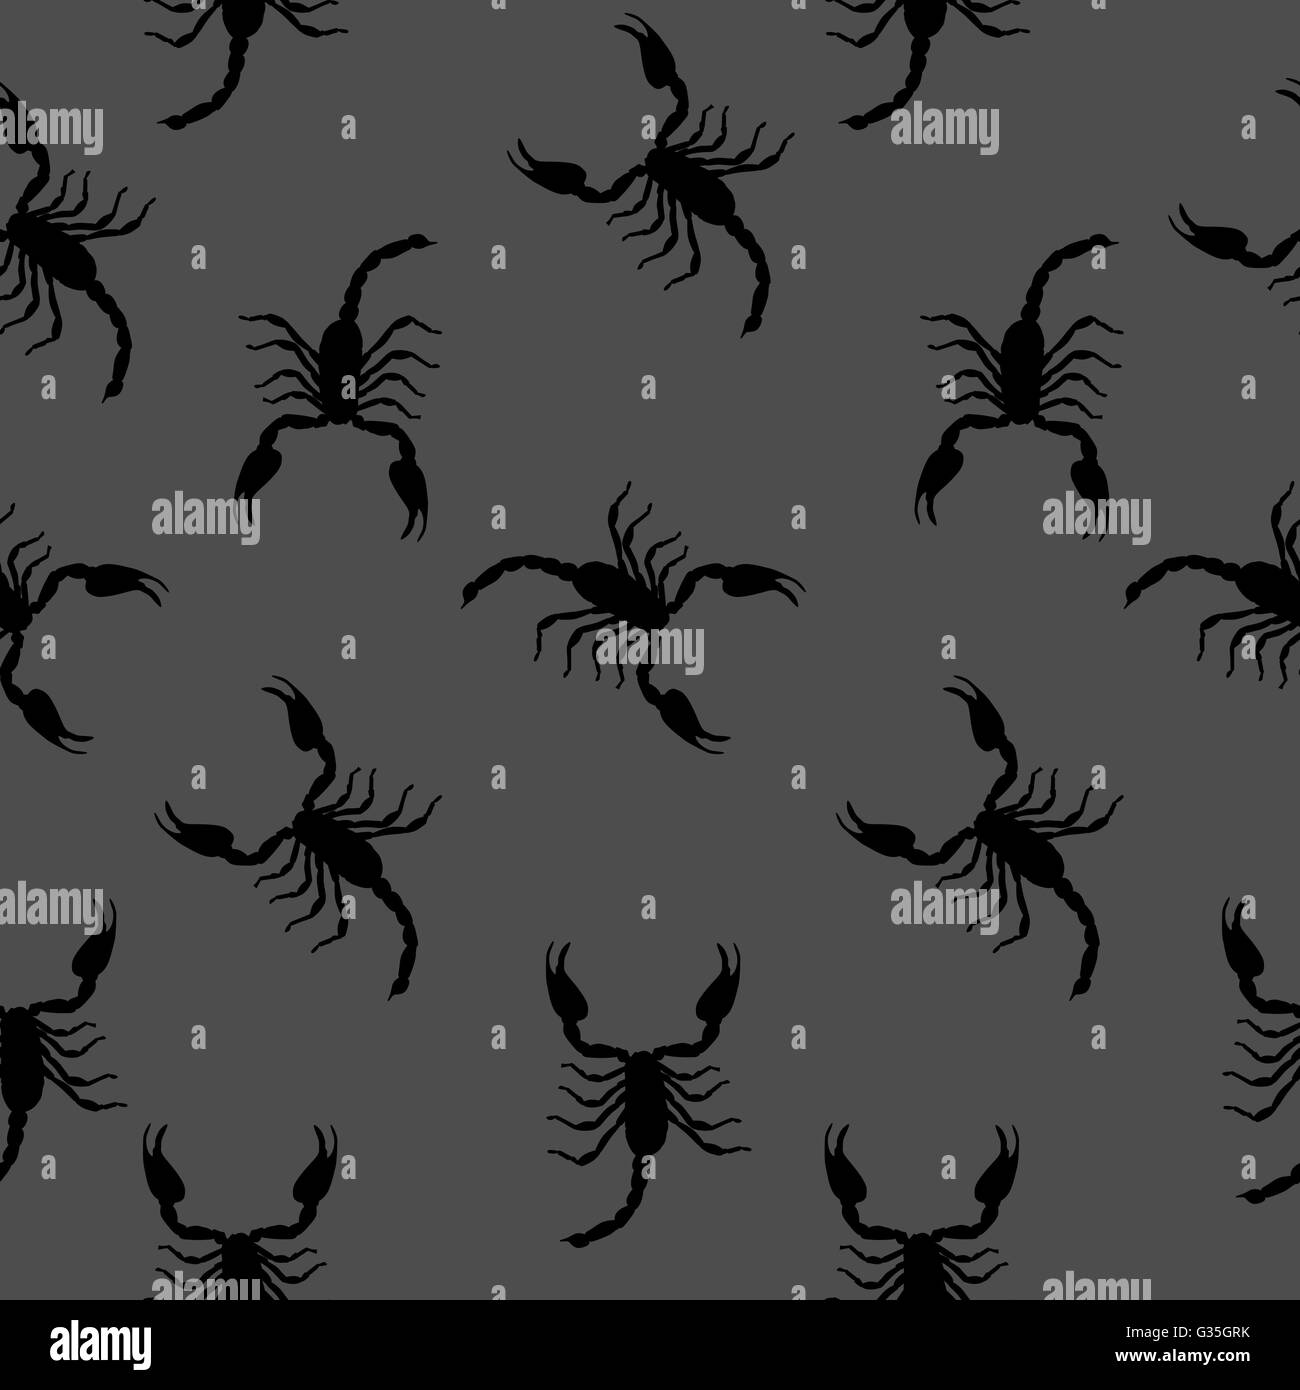 Large Scorpion Silhouette Seamless Pattern Background Vector Ill Stock Vector